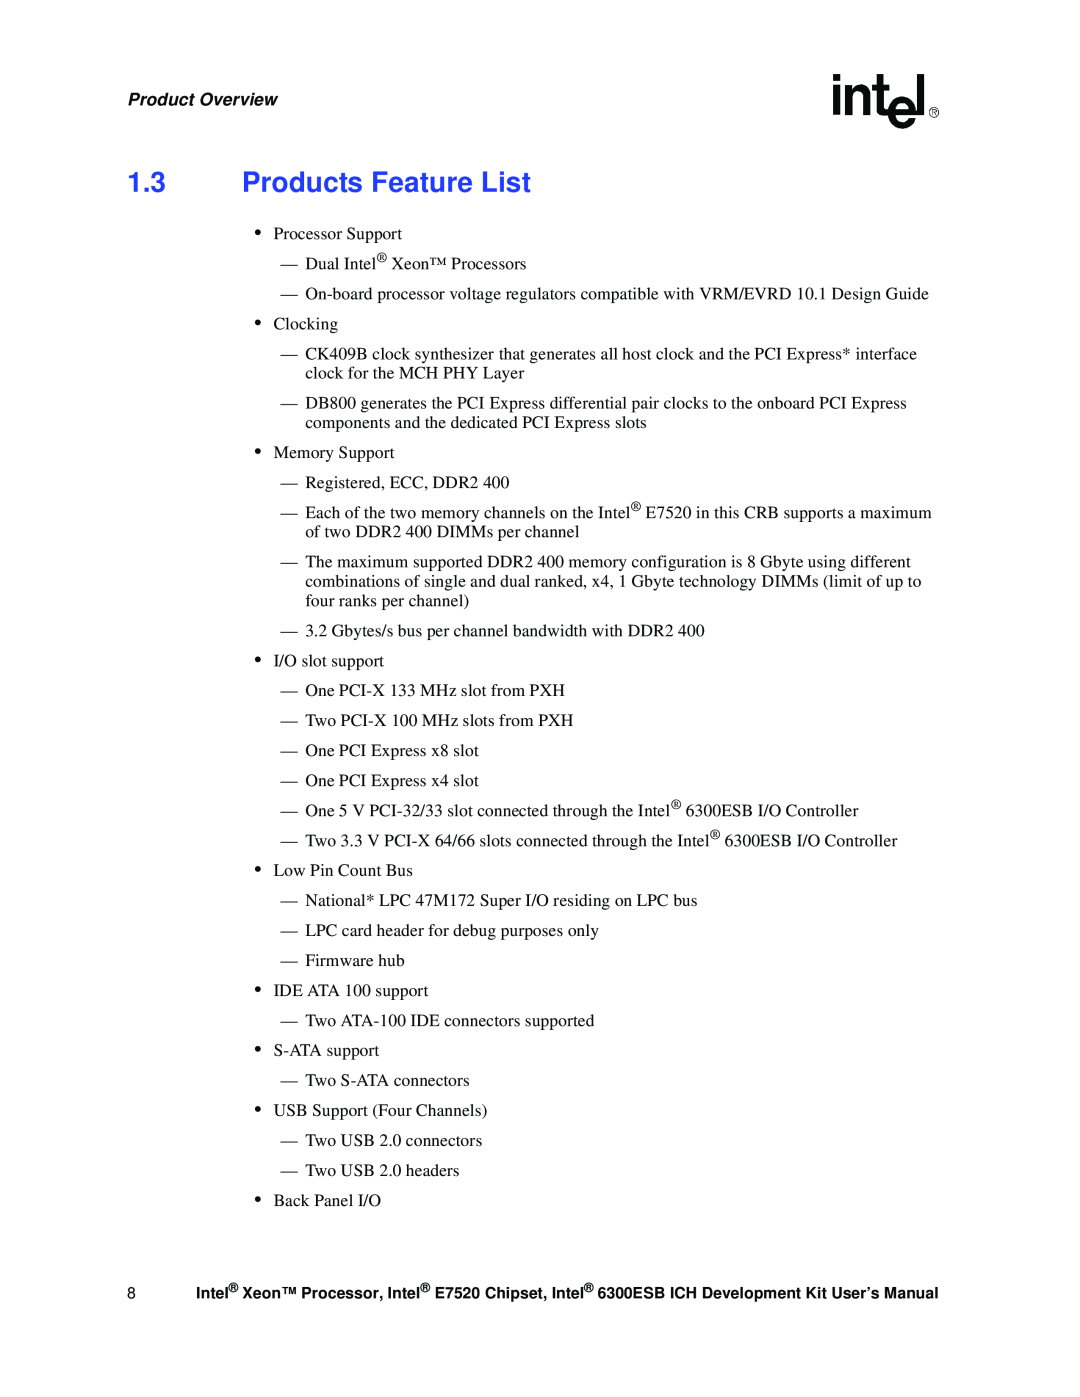 Intel Xeon, 6300ESB ICH user manual Products Feature List, Product Overview 